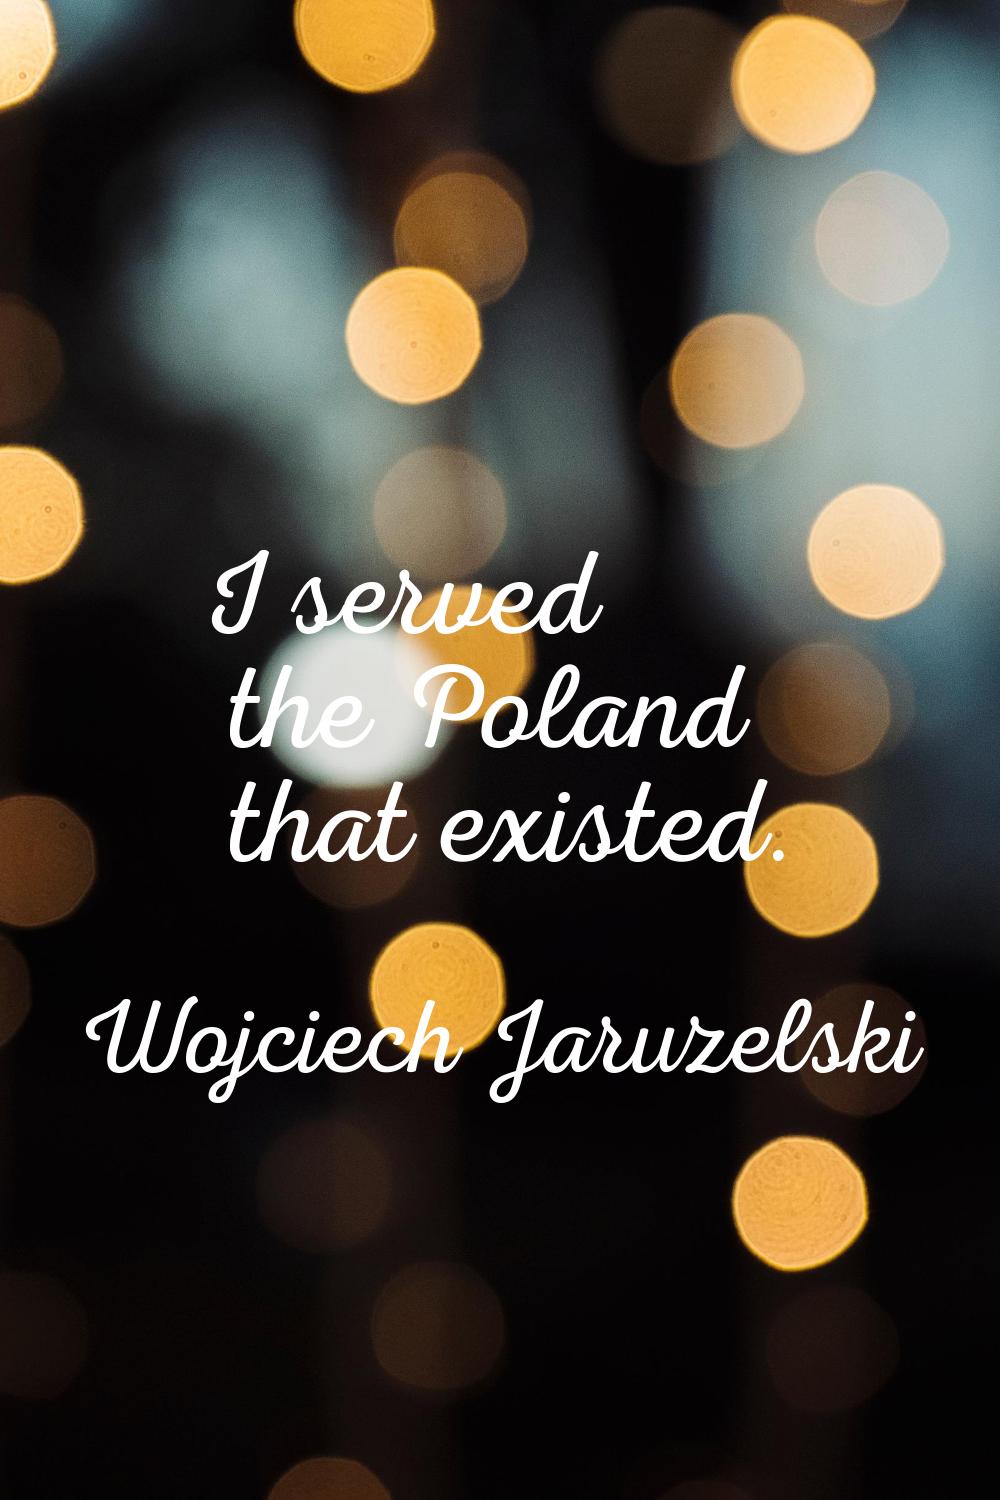 I served the Poland that existed.